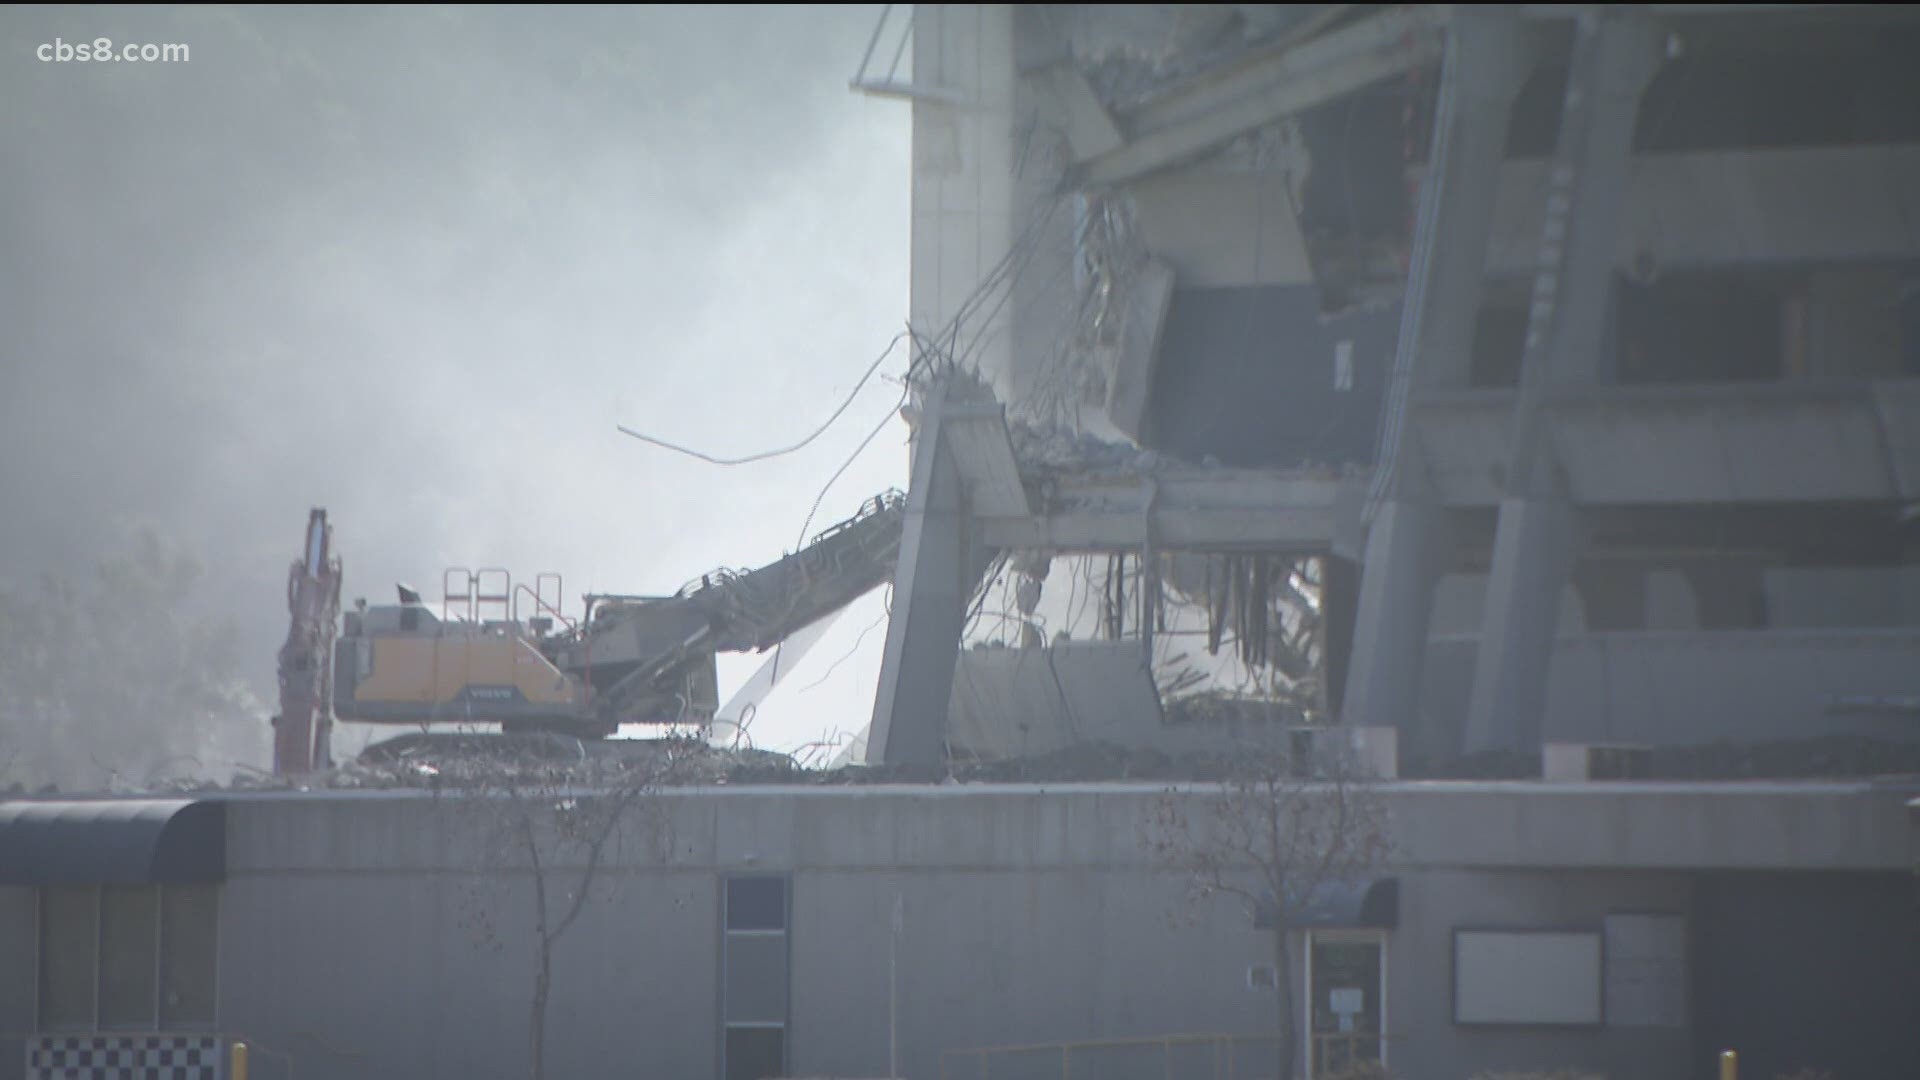 News 8 set to find out why San Diego Stadium wasn’t imploded like many stadiums of the past.